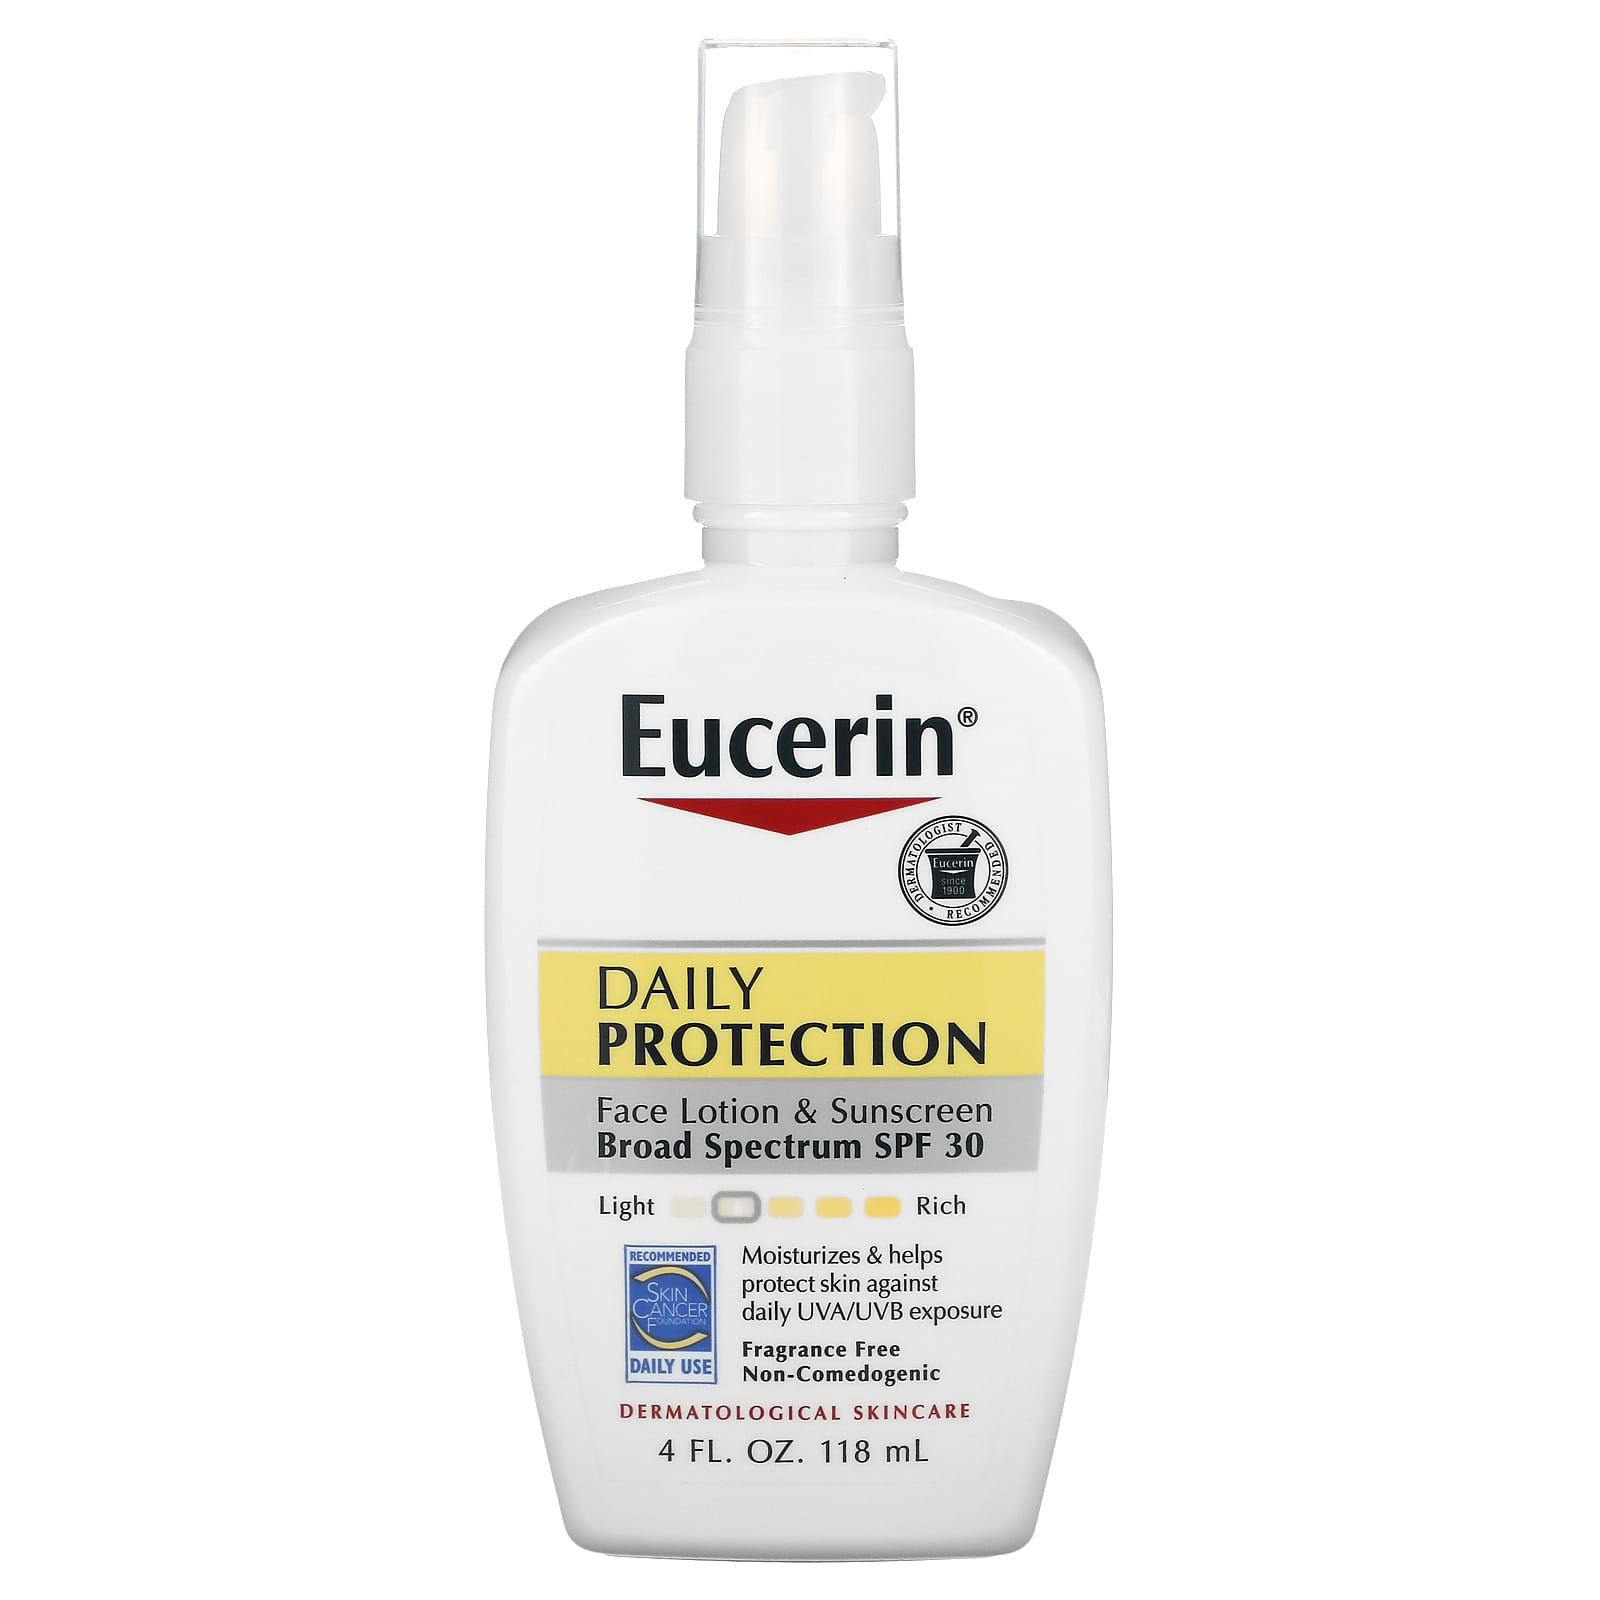 Grab your 5% discount on Eucerin Daily Protection Face Lotion & Sunscreen today!